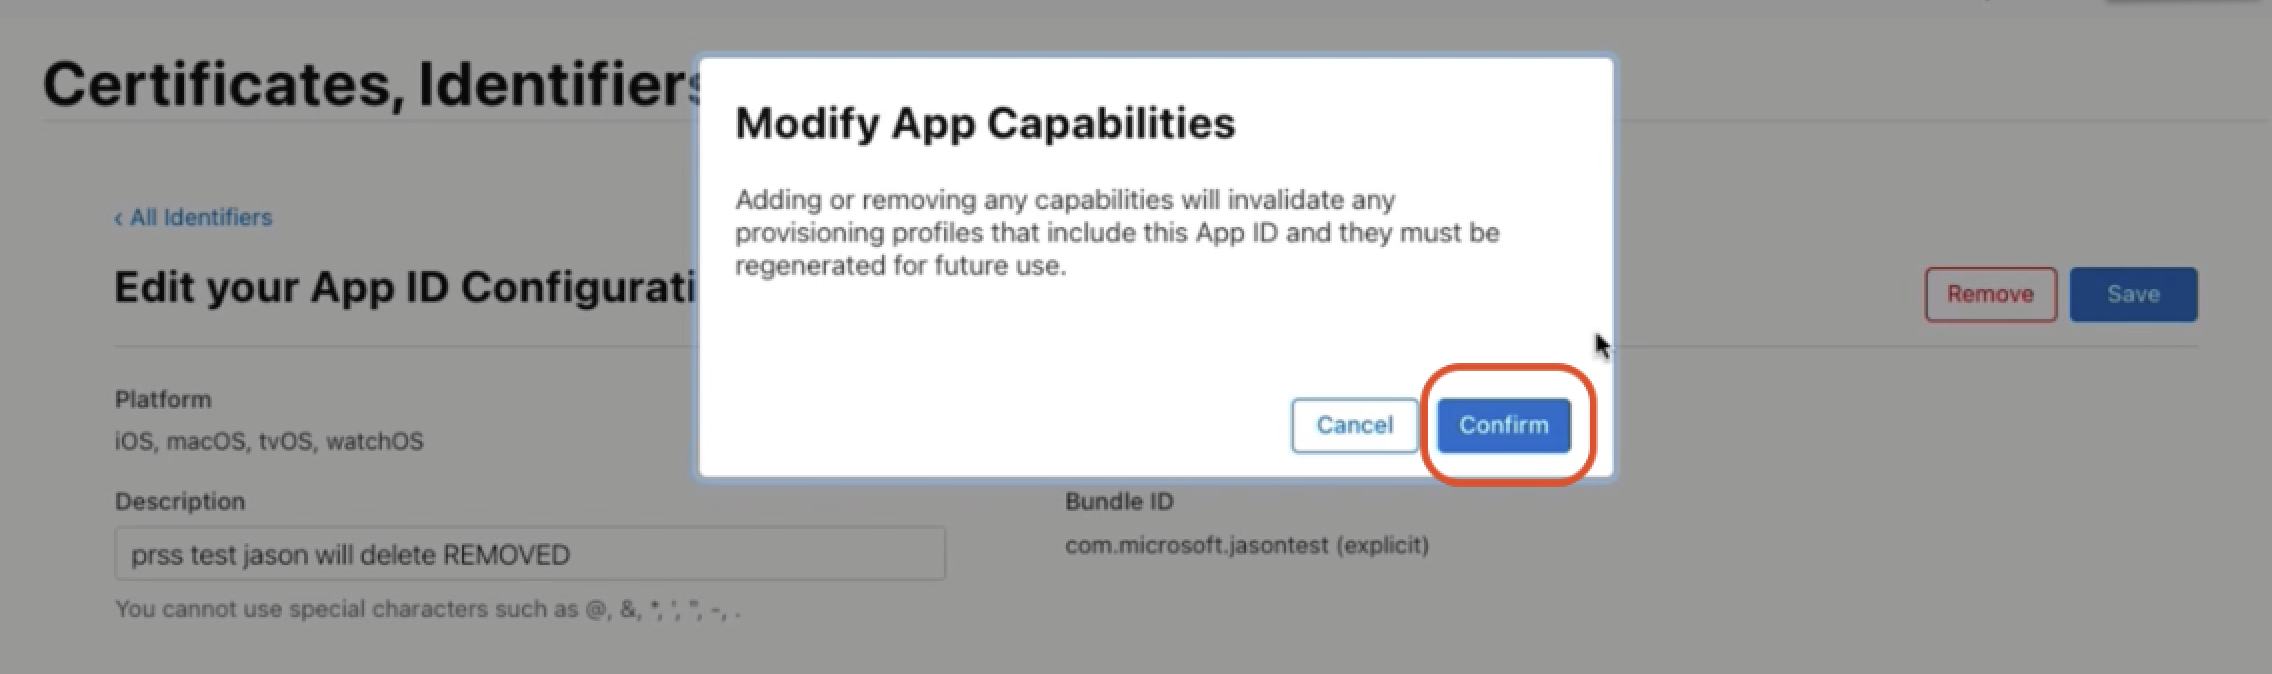 Screenshot that shows the Confirm button for modifying app capabilities.